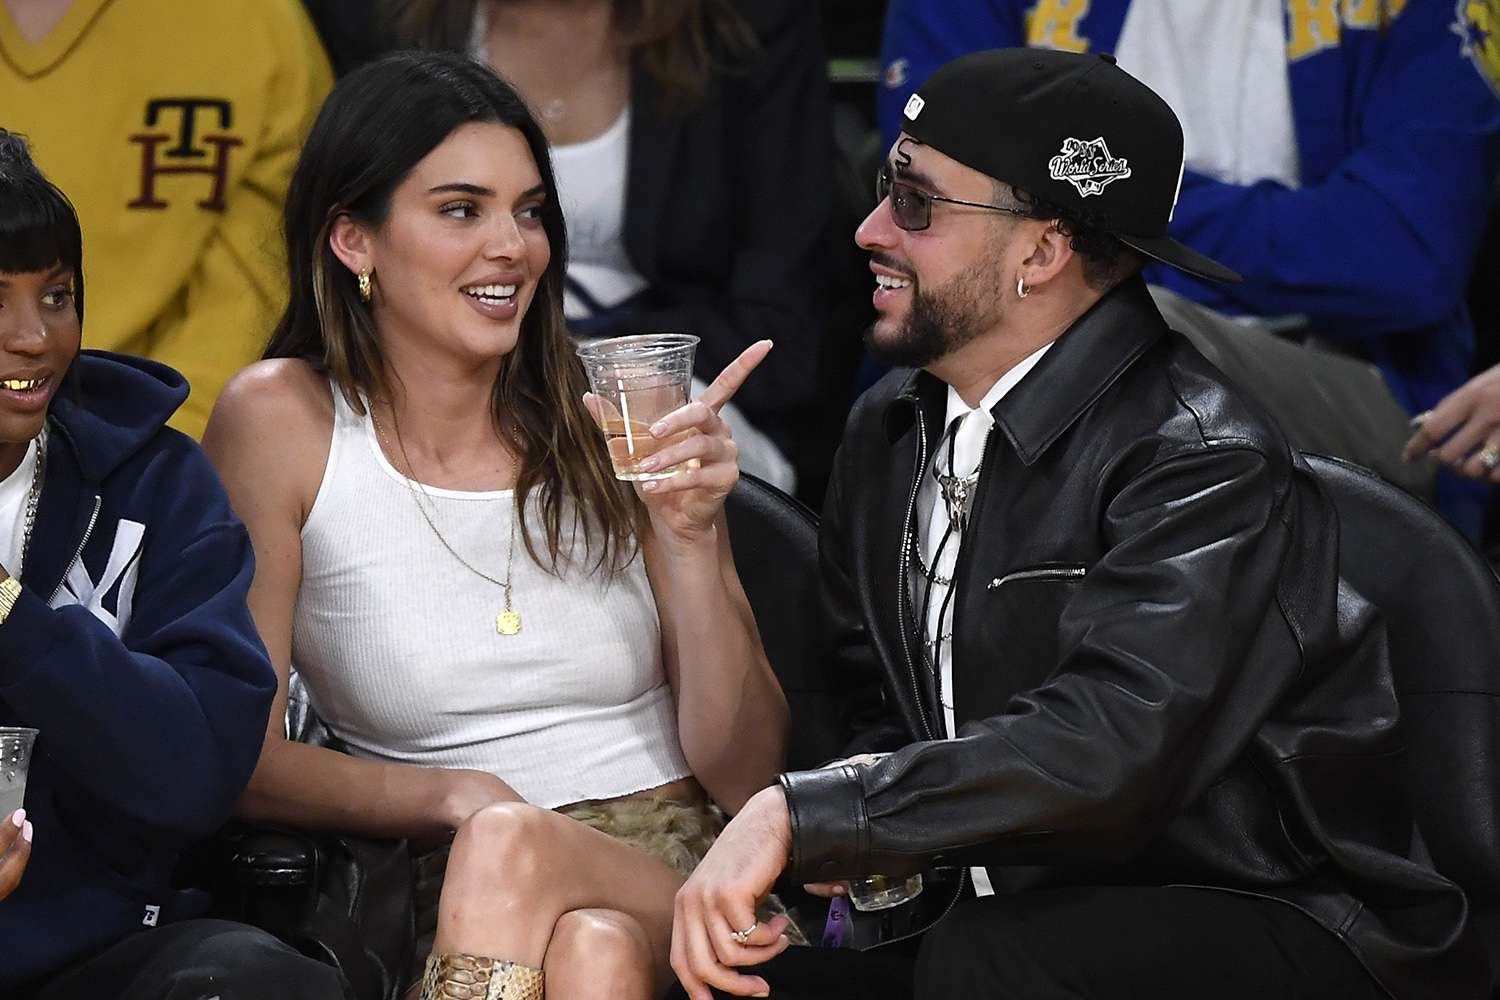 Kendall Jenner and Bad Bunny Are 'Dating' Again After Short 'Break': 'Things Are Great Again' (Exclusive)